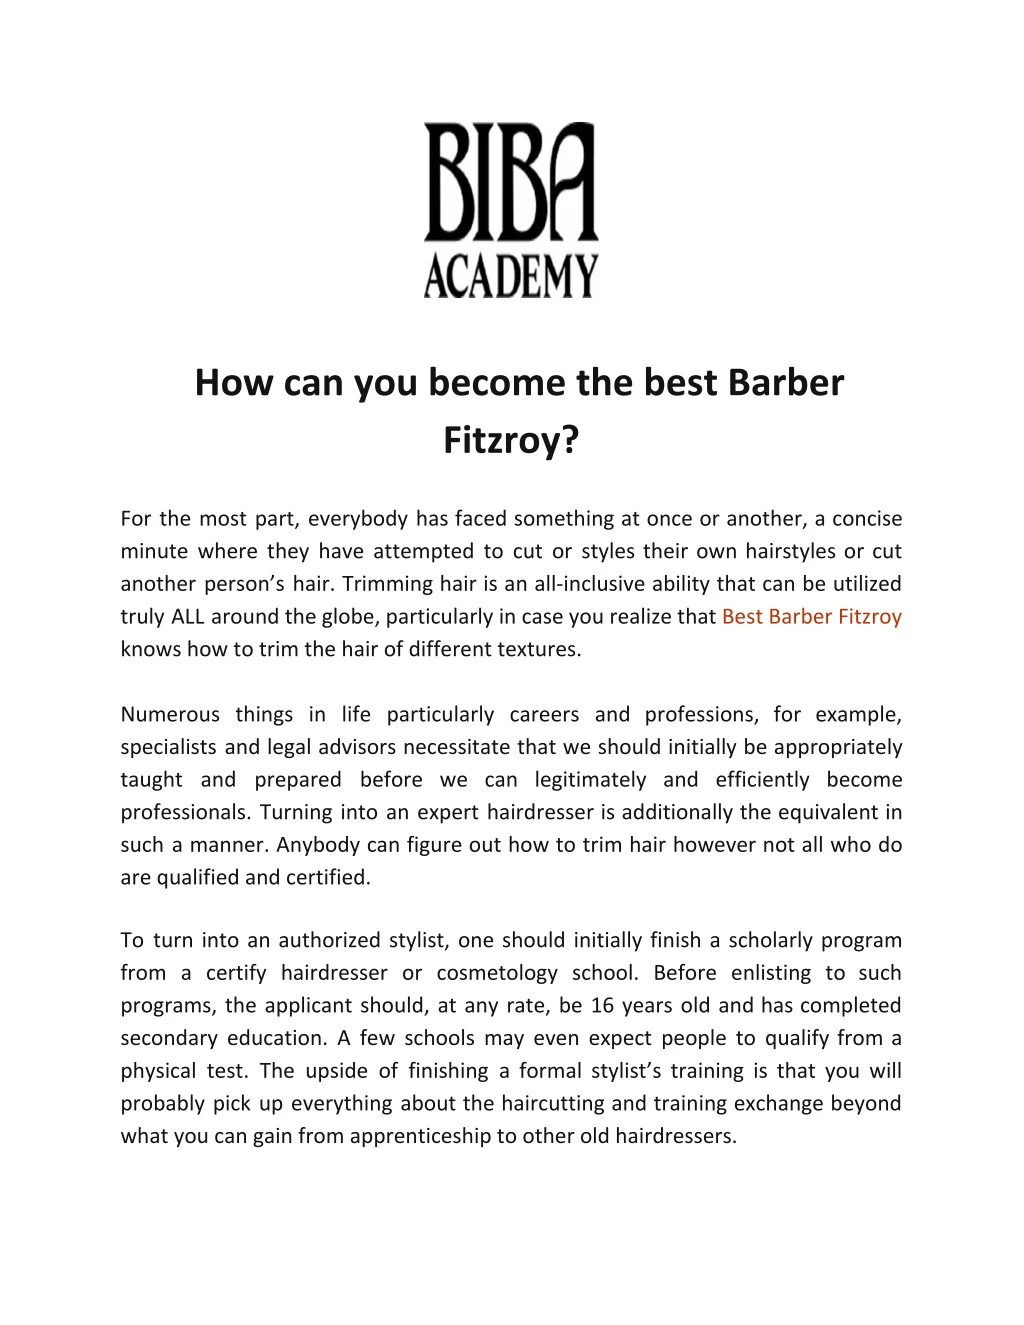 how can you become the best barber fitzroy